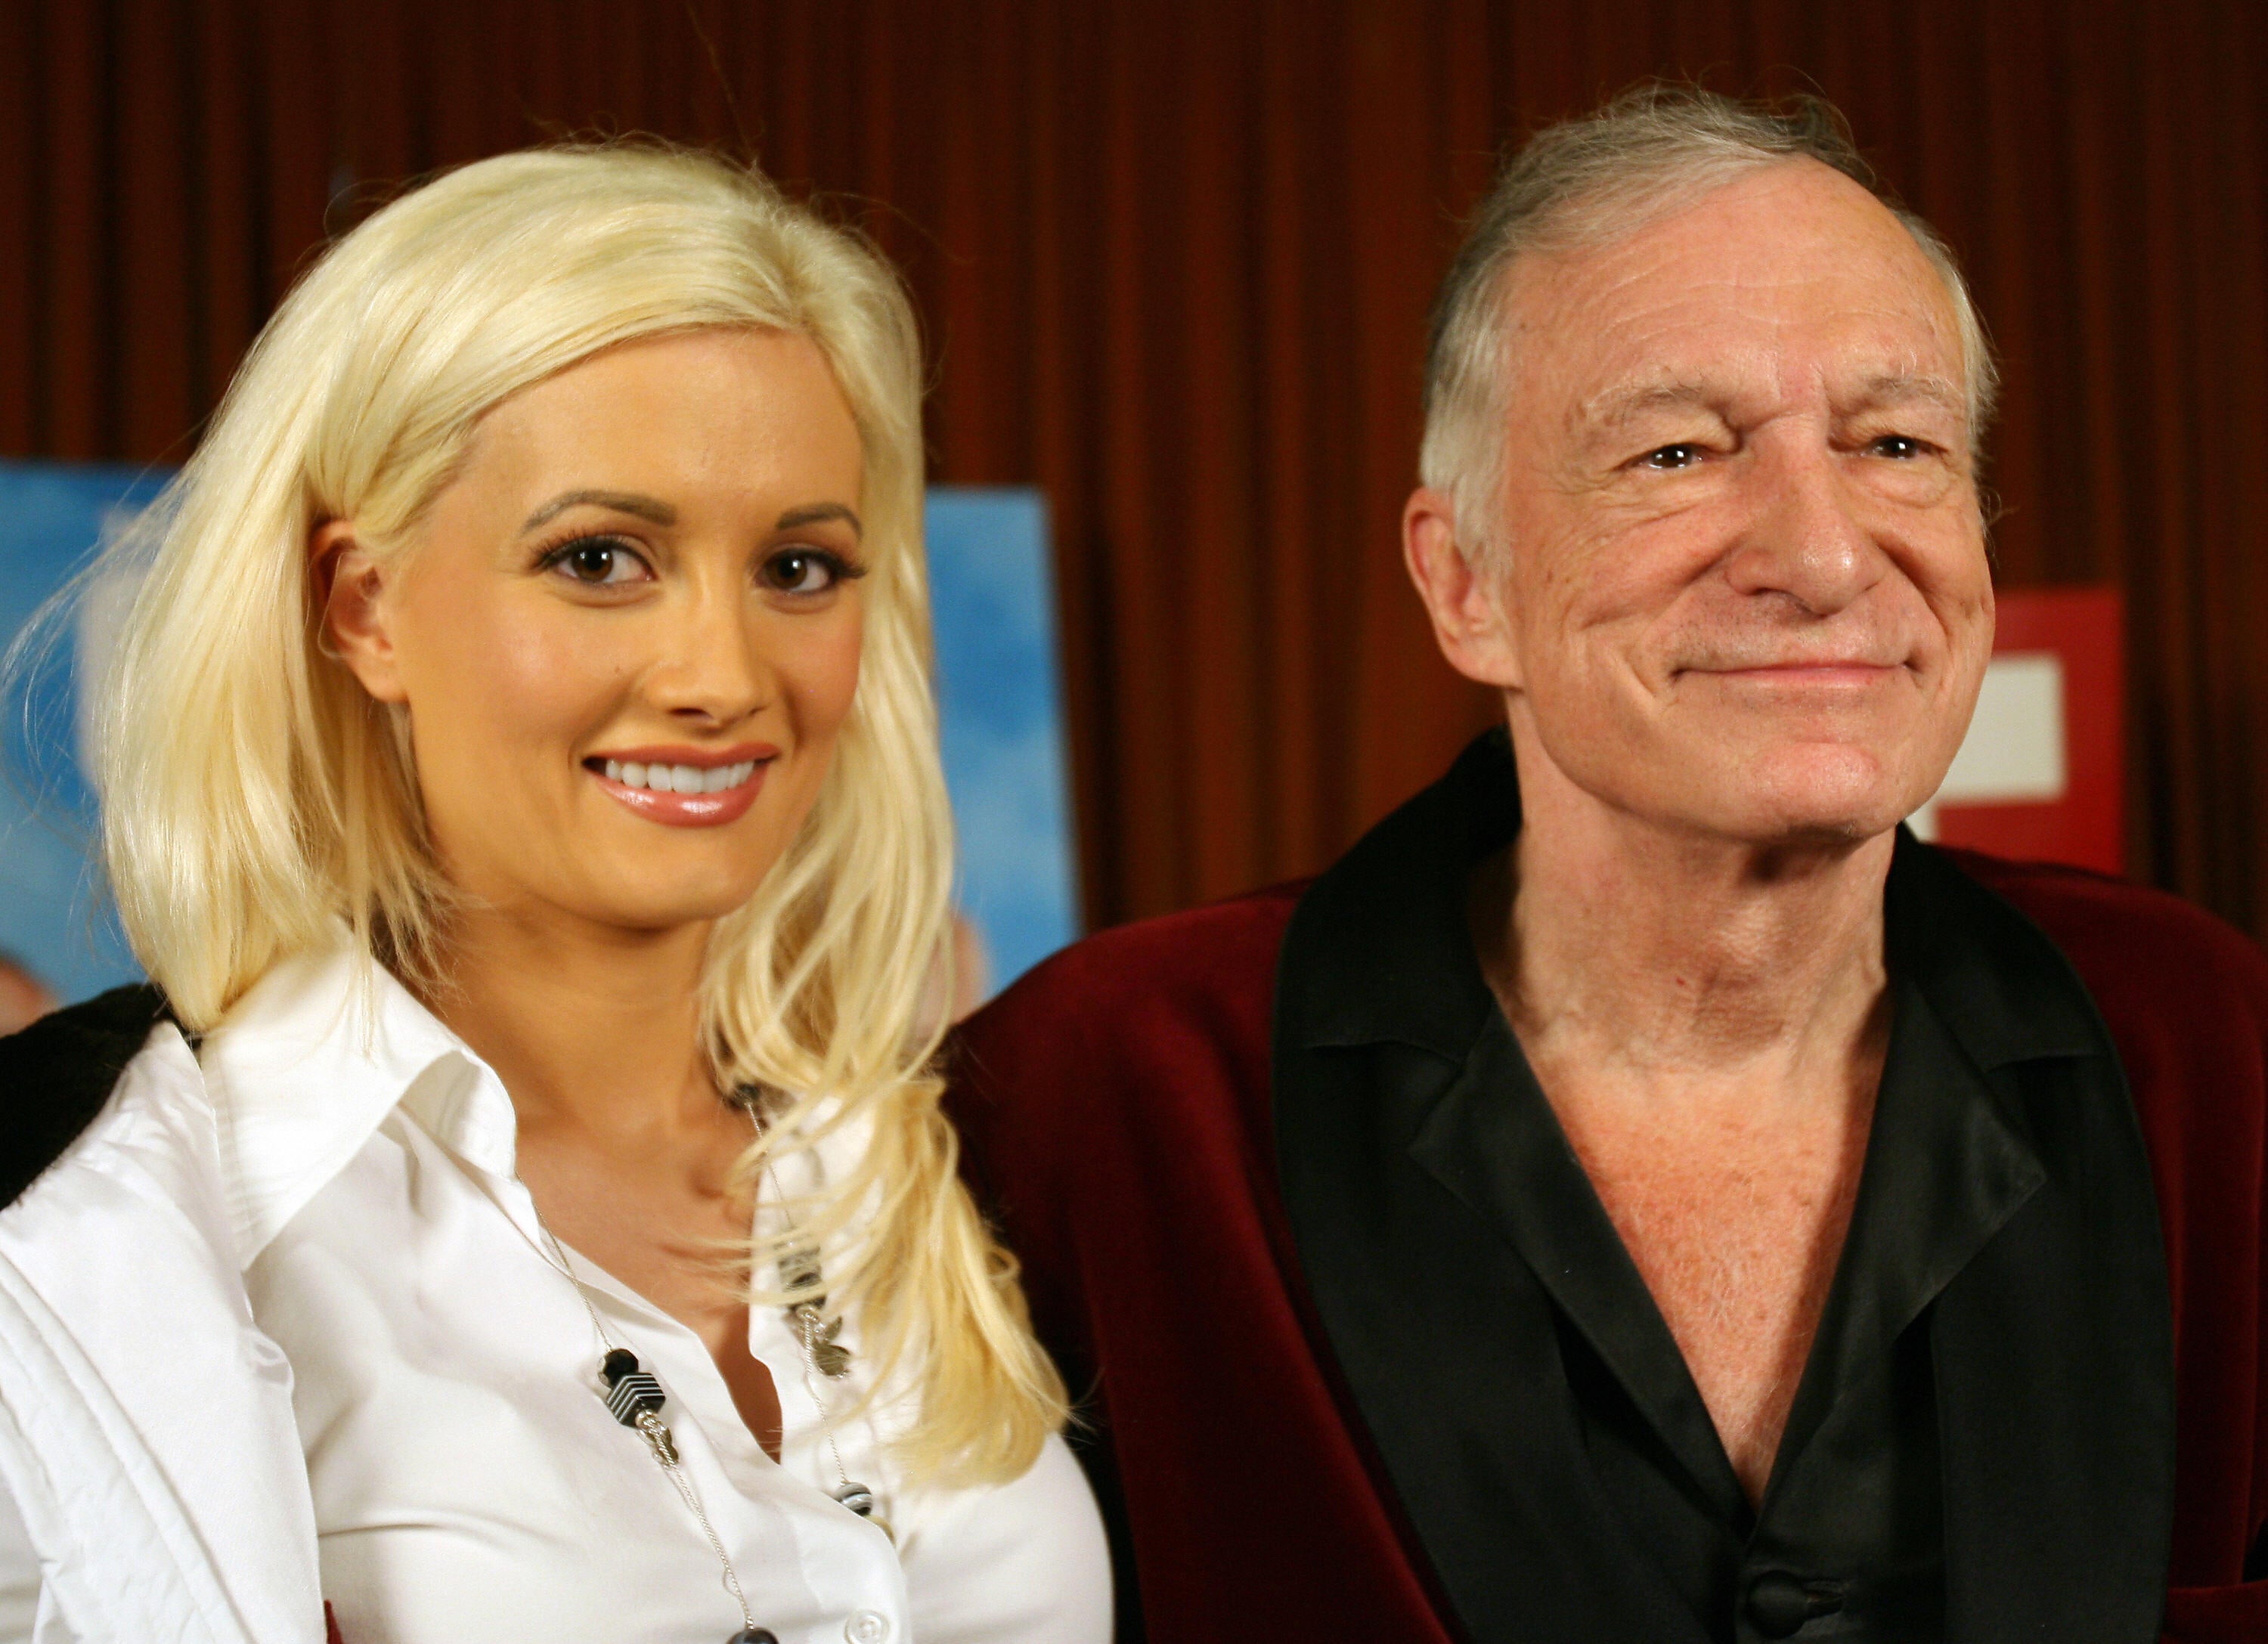 Holly Madison discusses life at the Playboy Mansion in new docuseries